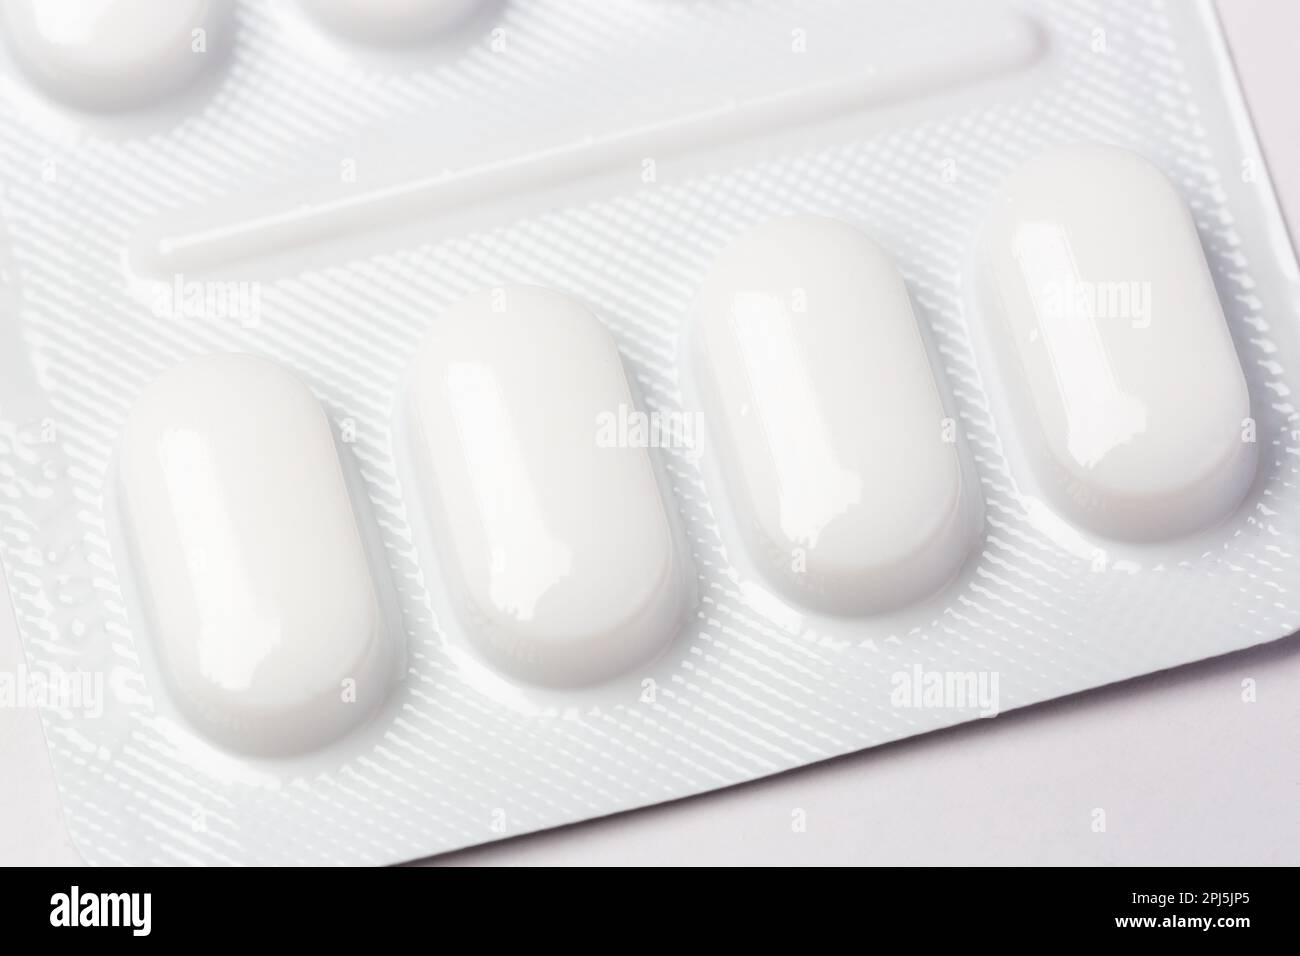 Close up of pills in white plastic blister pack Stock Photo